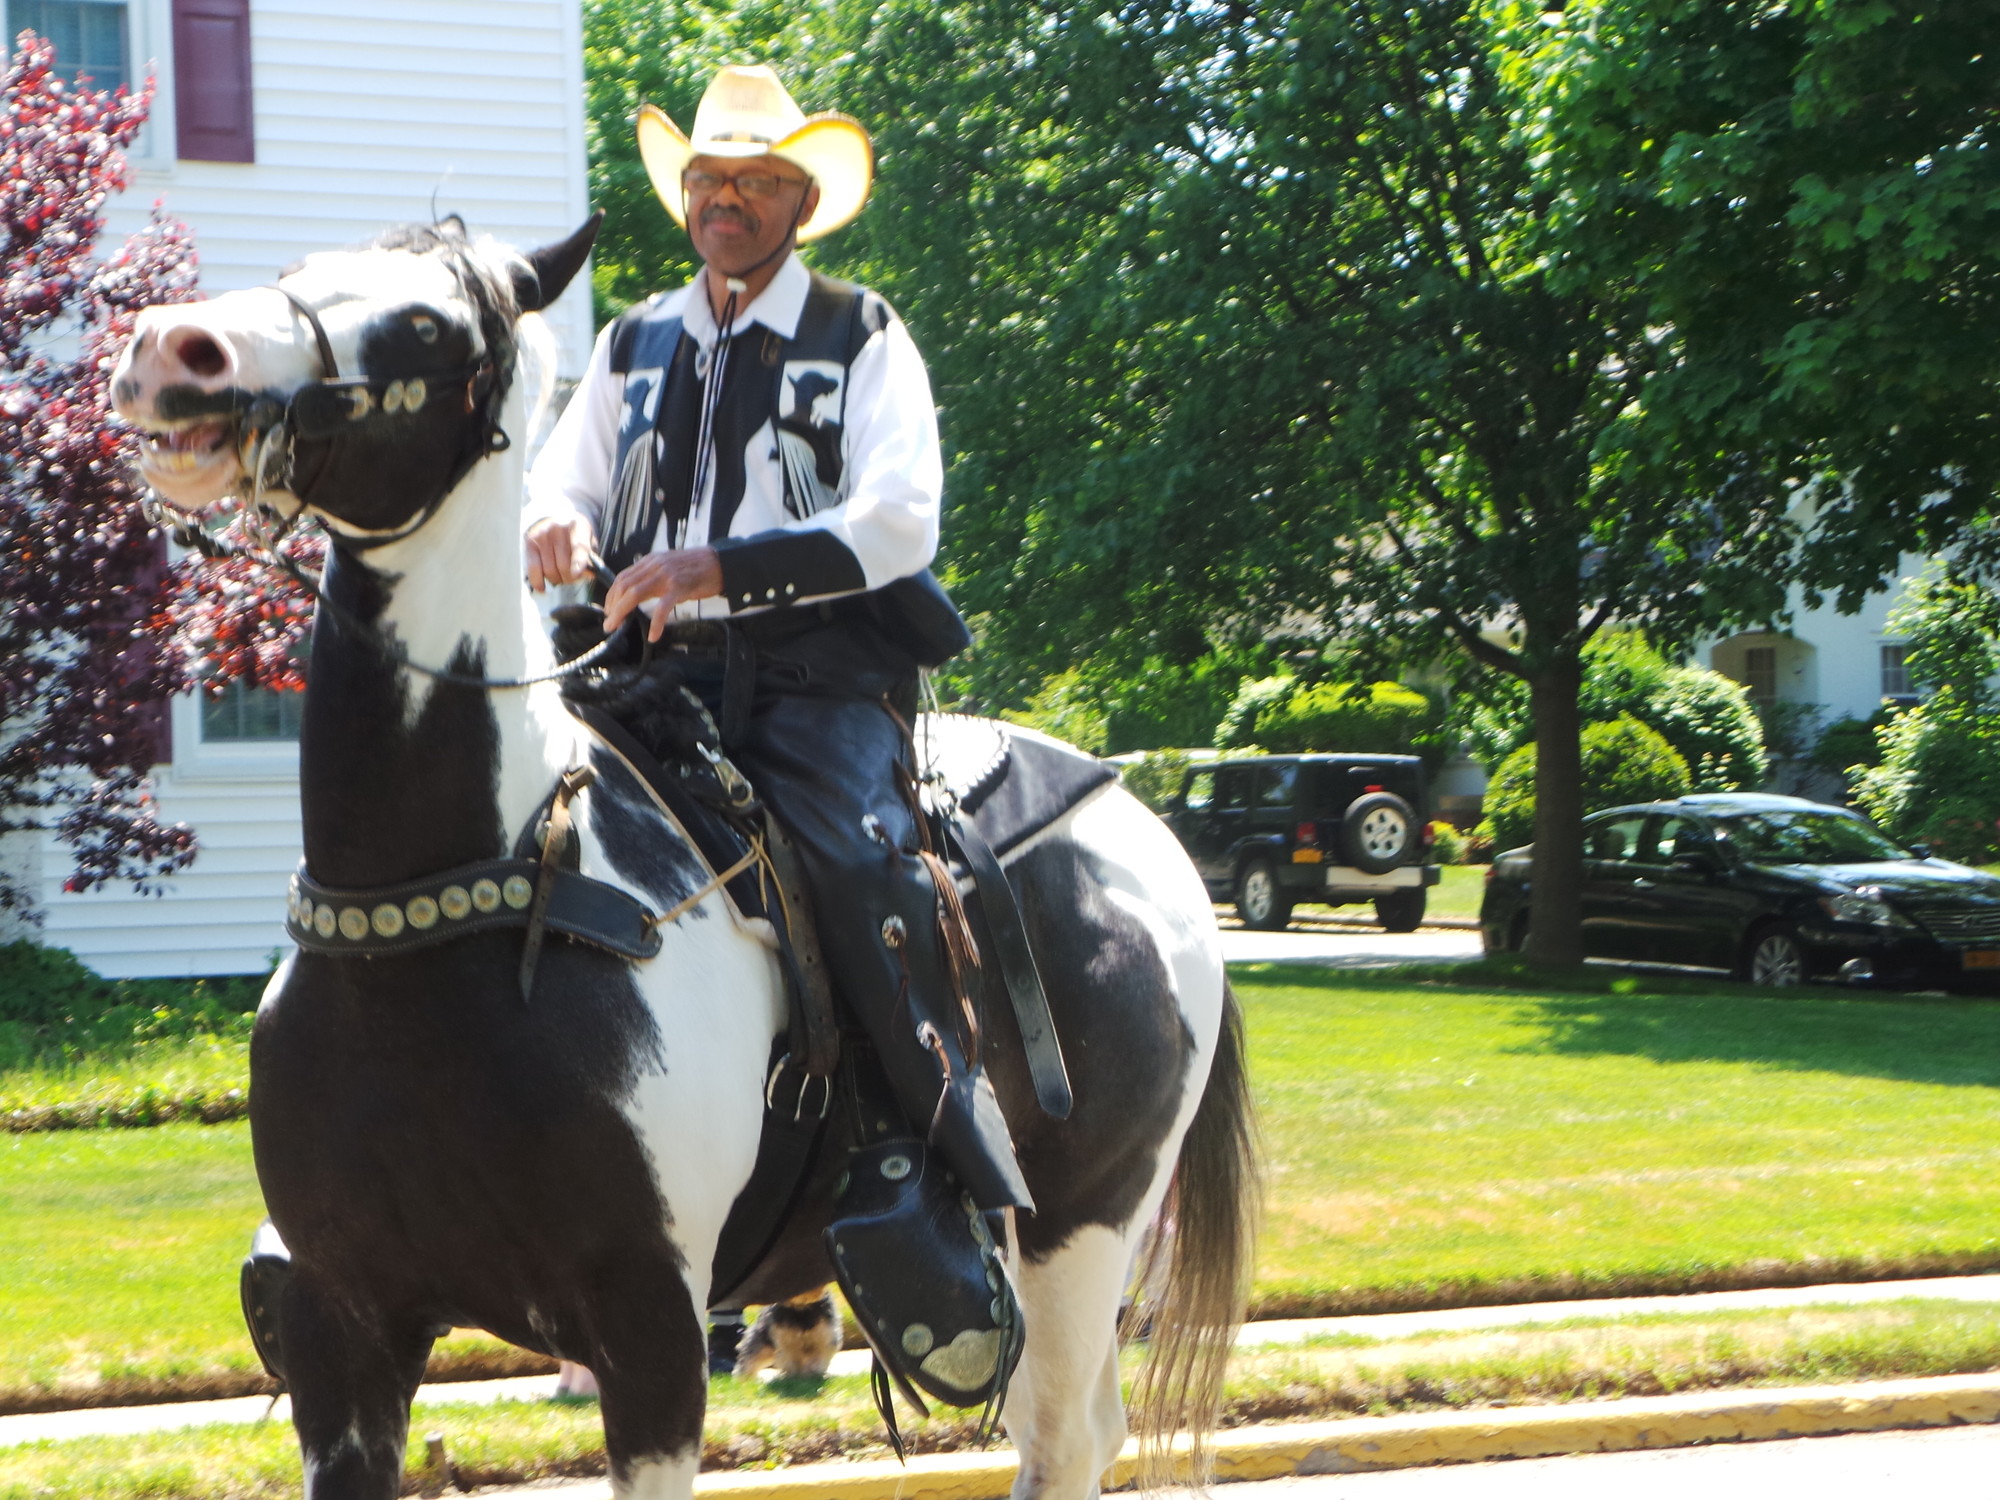 R.W. “Curly” Hall, from the Federation of Black Cowboys, makes his way down Hempstead Ave. during Malverne’s Memorial Day parade.